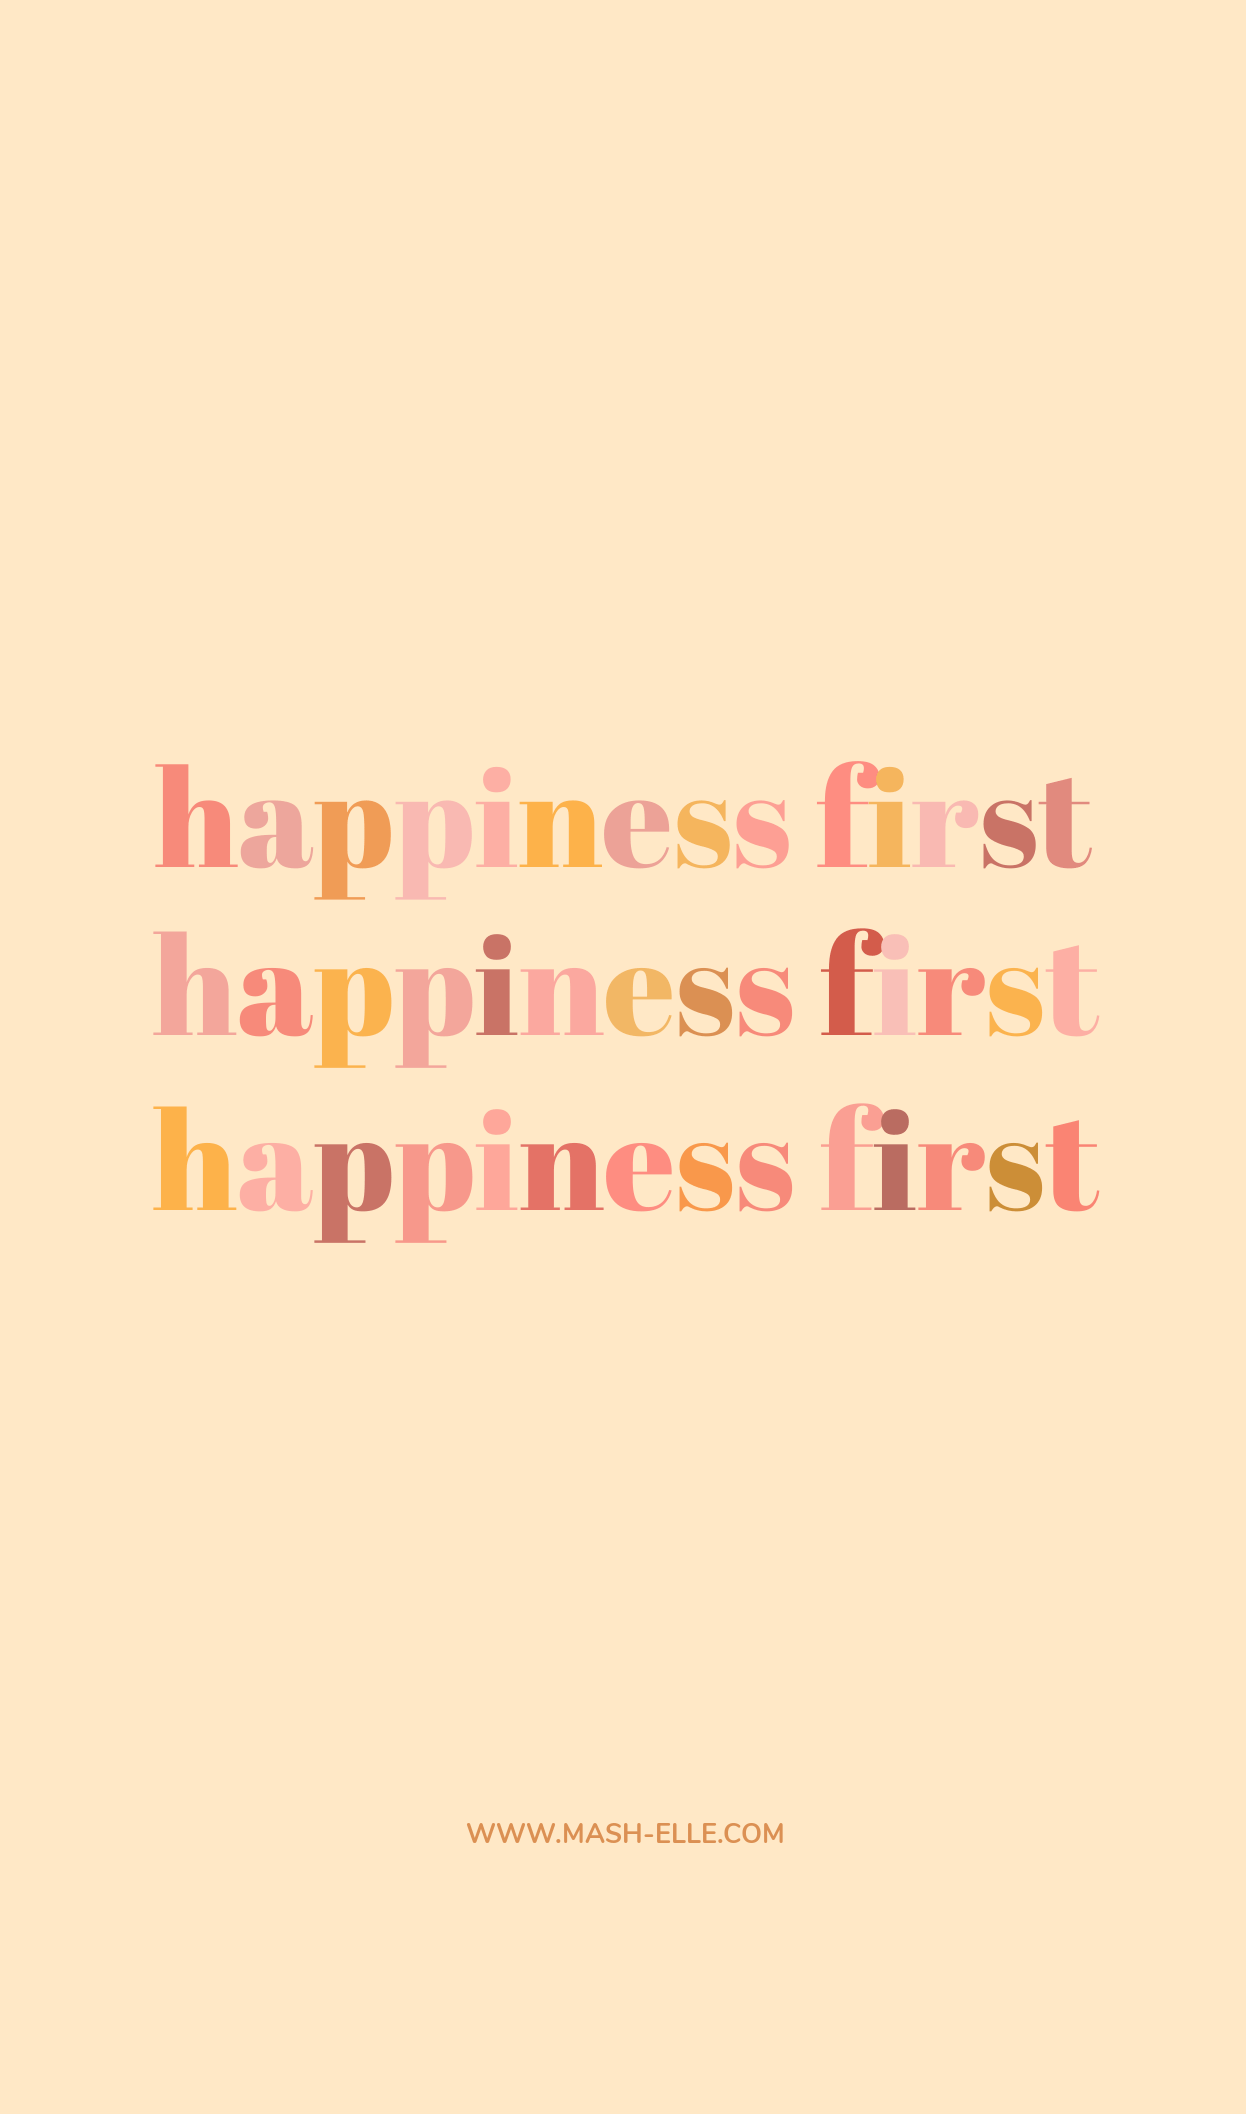 Happiness first, happinessthe best way to start your day - Positivity